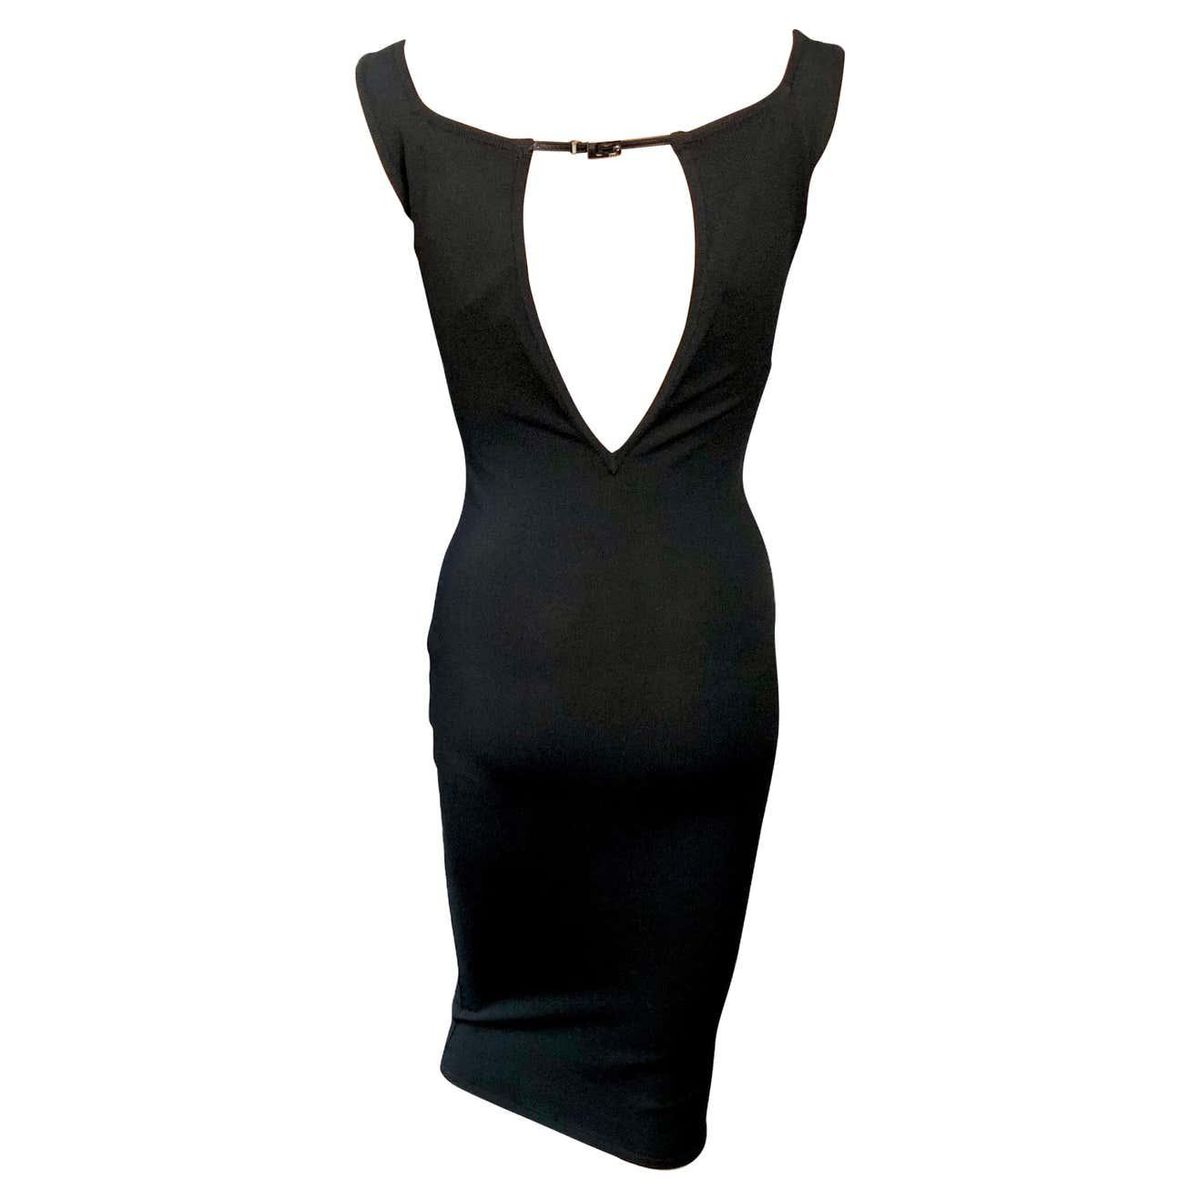 Tom Ford for Gucci S/S 1998 Bodycon Cutout Back Buckled Knit Midi Dress